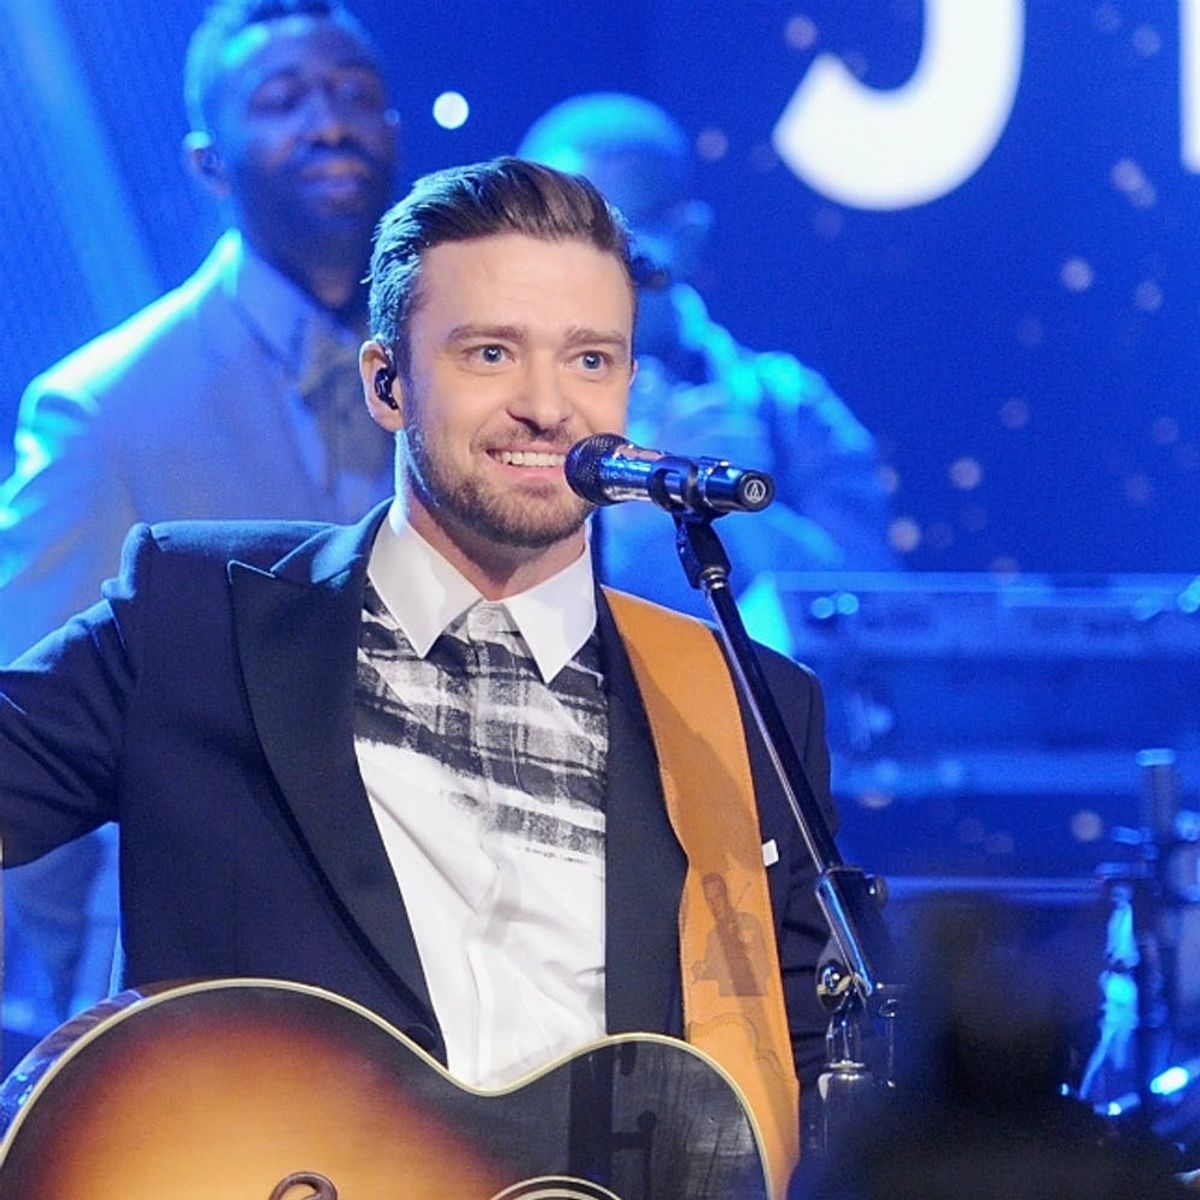 Justin Timberlake Just Released a New Video and We Have Questions